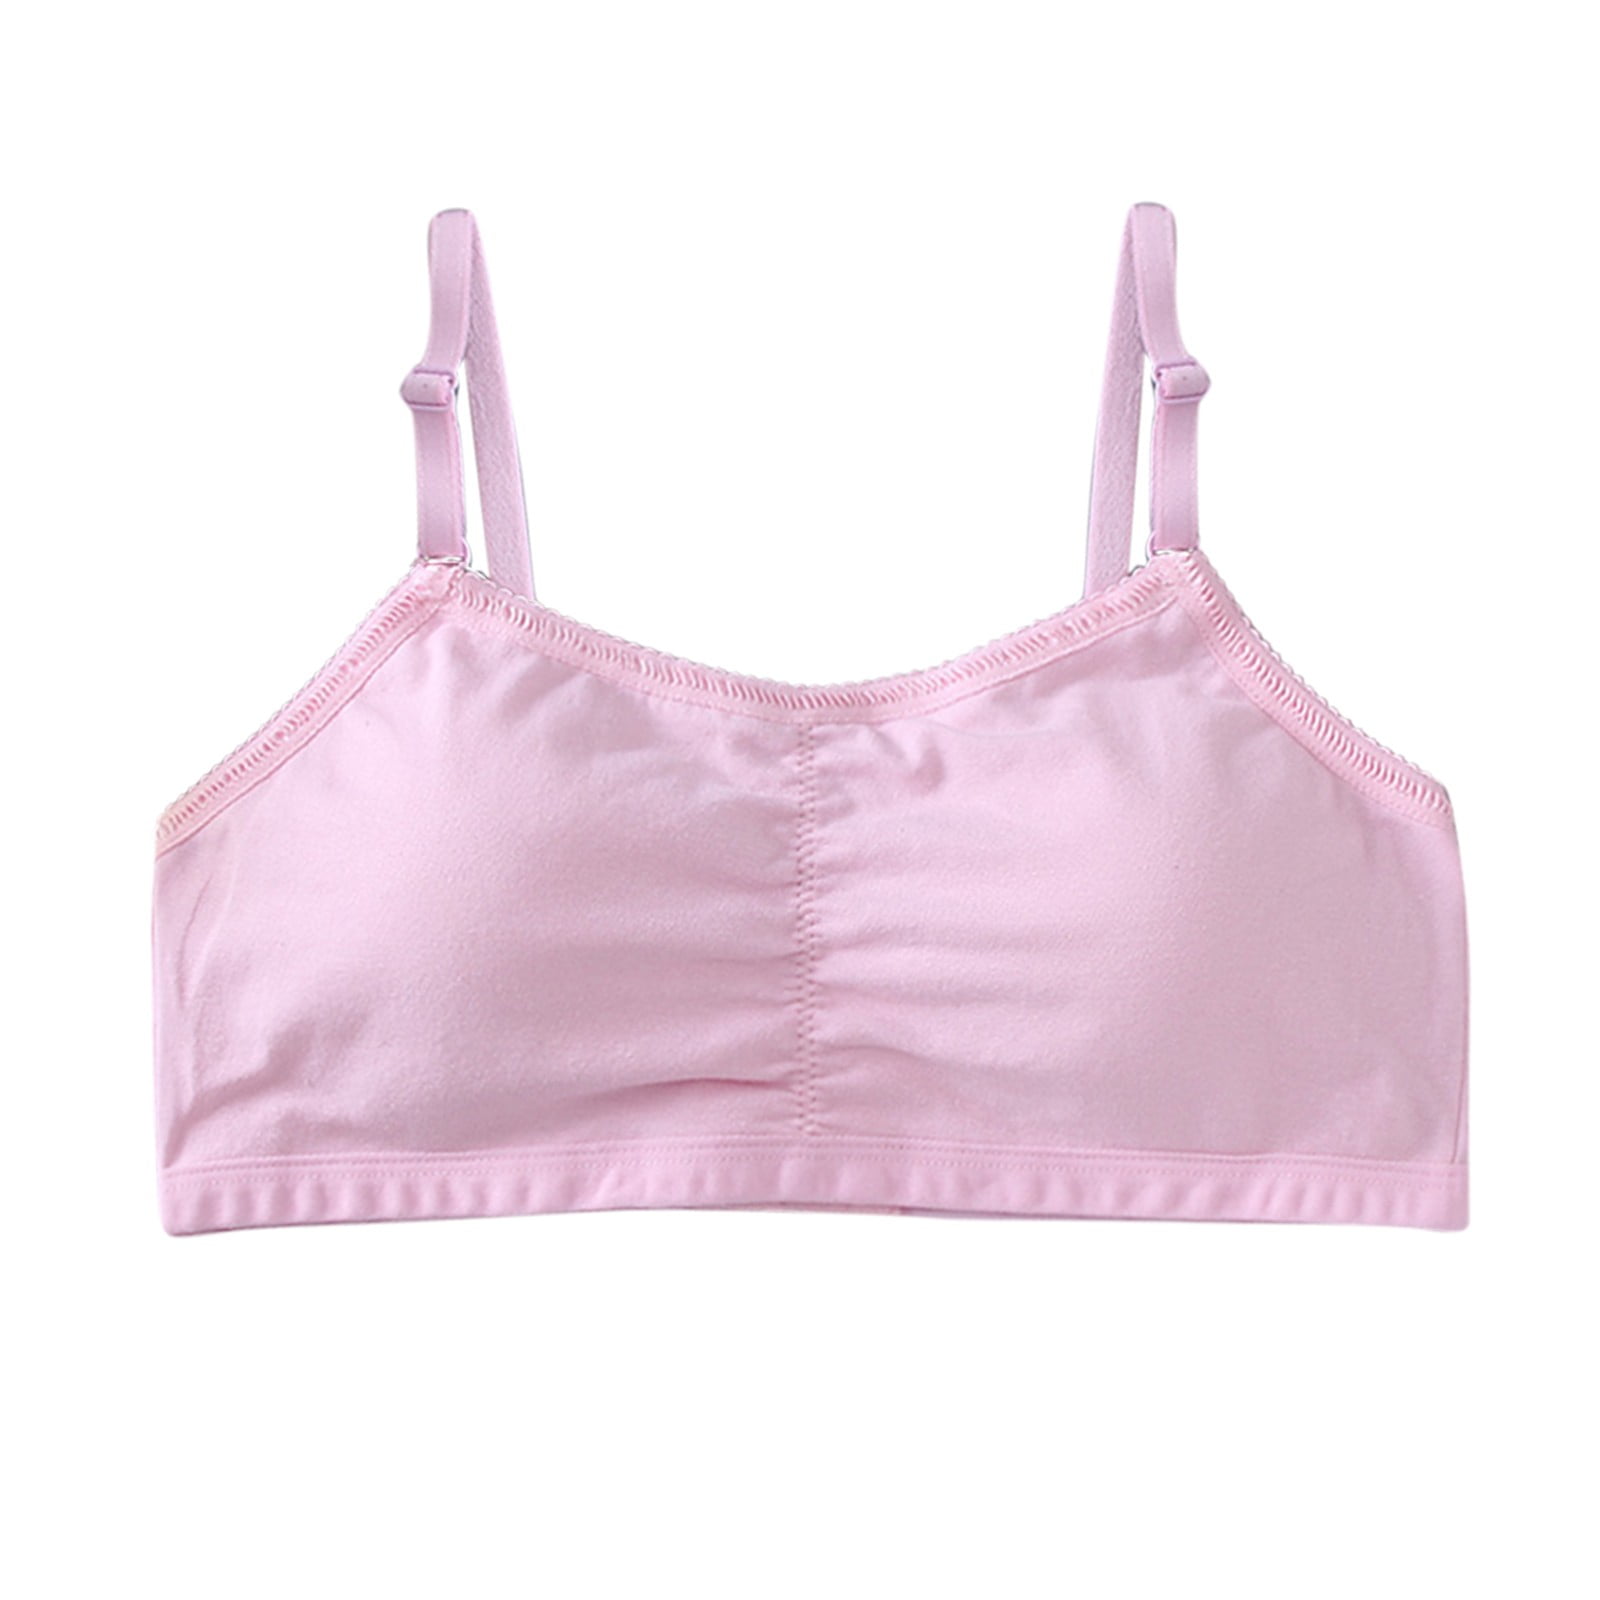 PINK is a college girl's must-shop destination for the cutest bras